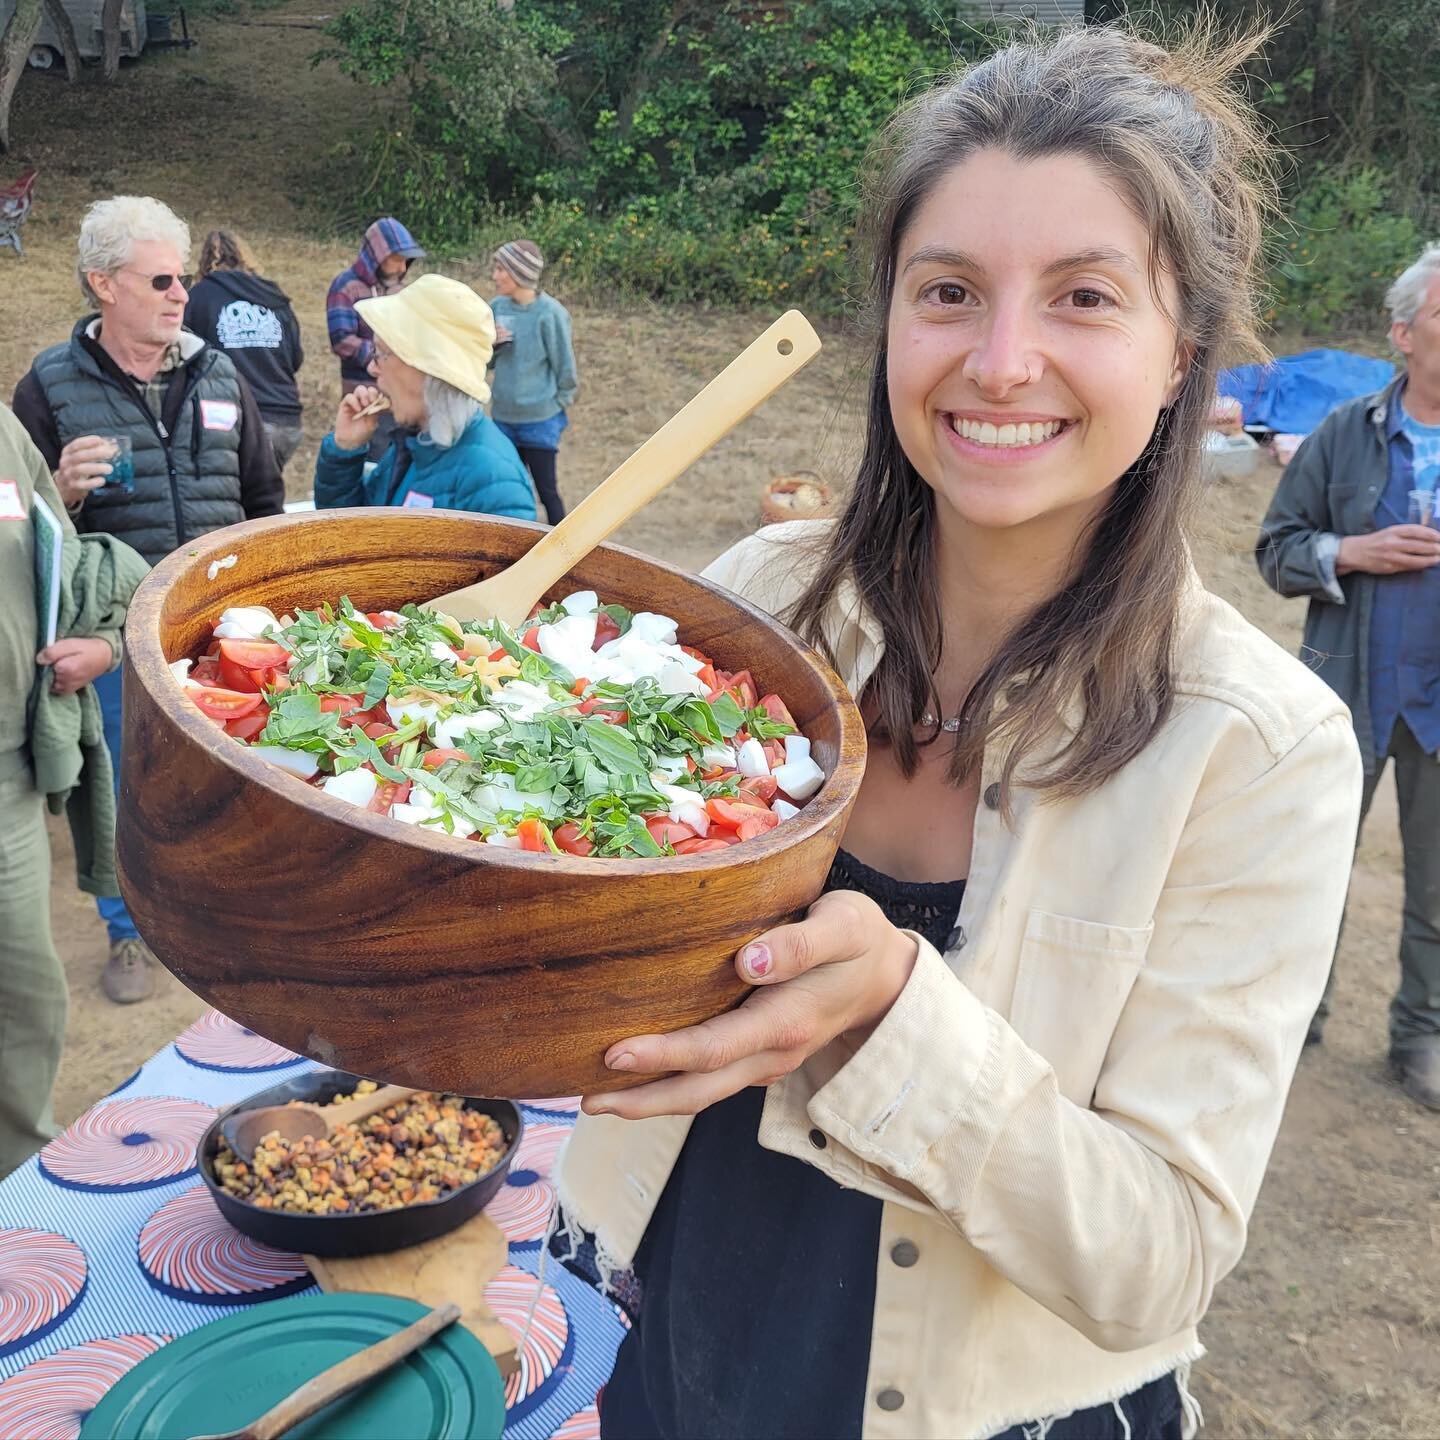 Culinary Arts held most of my skill from a young age&mdash;when I began to practice herbalism, the foundational theory led seamlessly into food. 
With my studies I found many examples of cultures which have herbal medicine deeply intertwined with foo